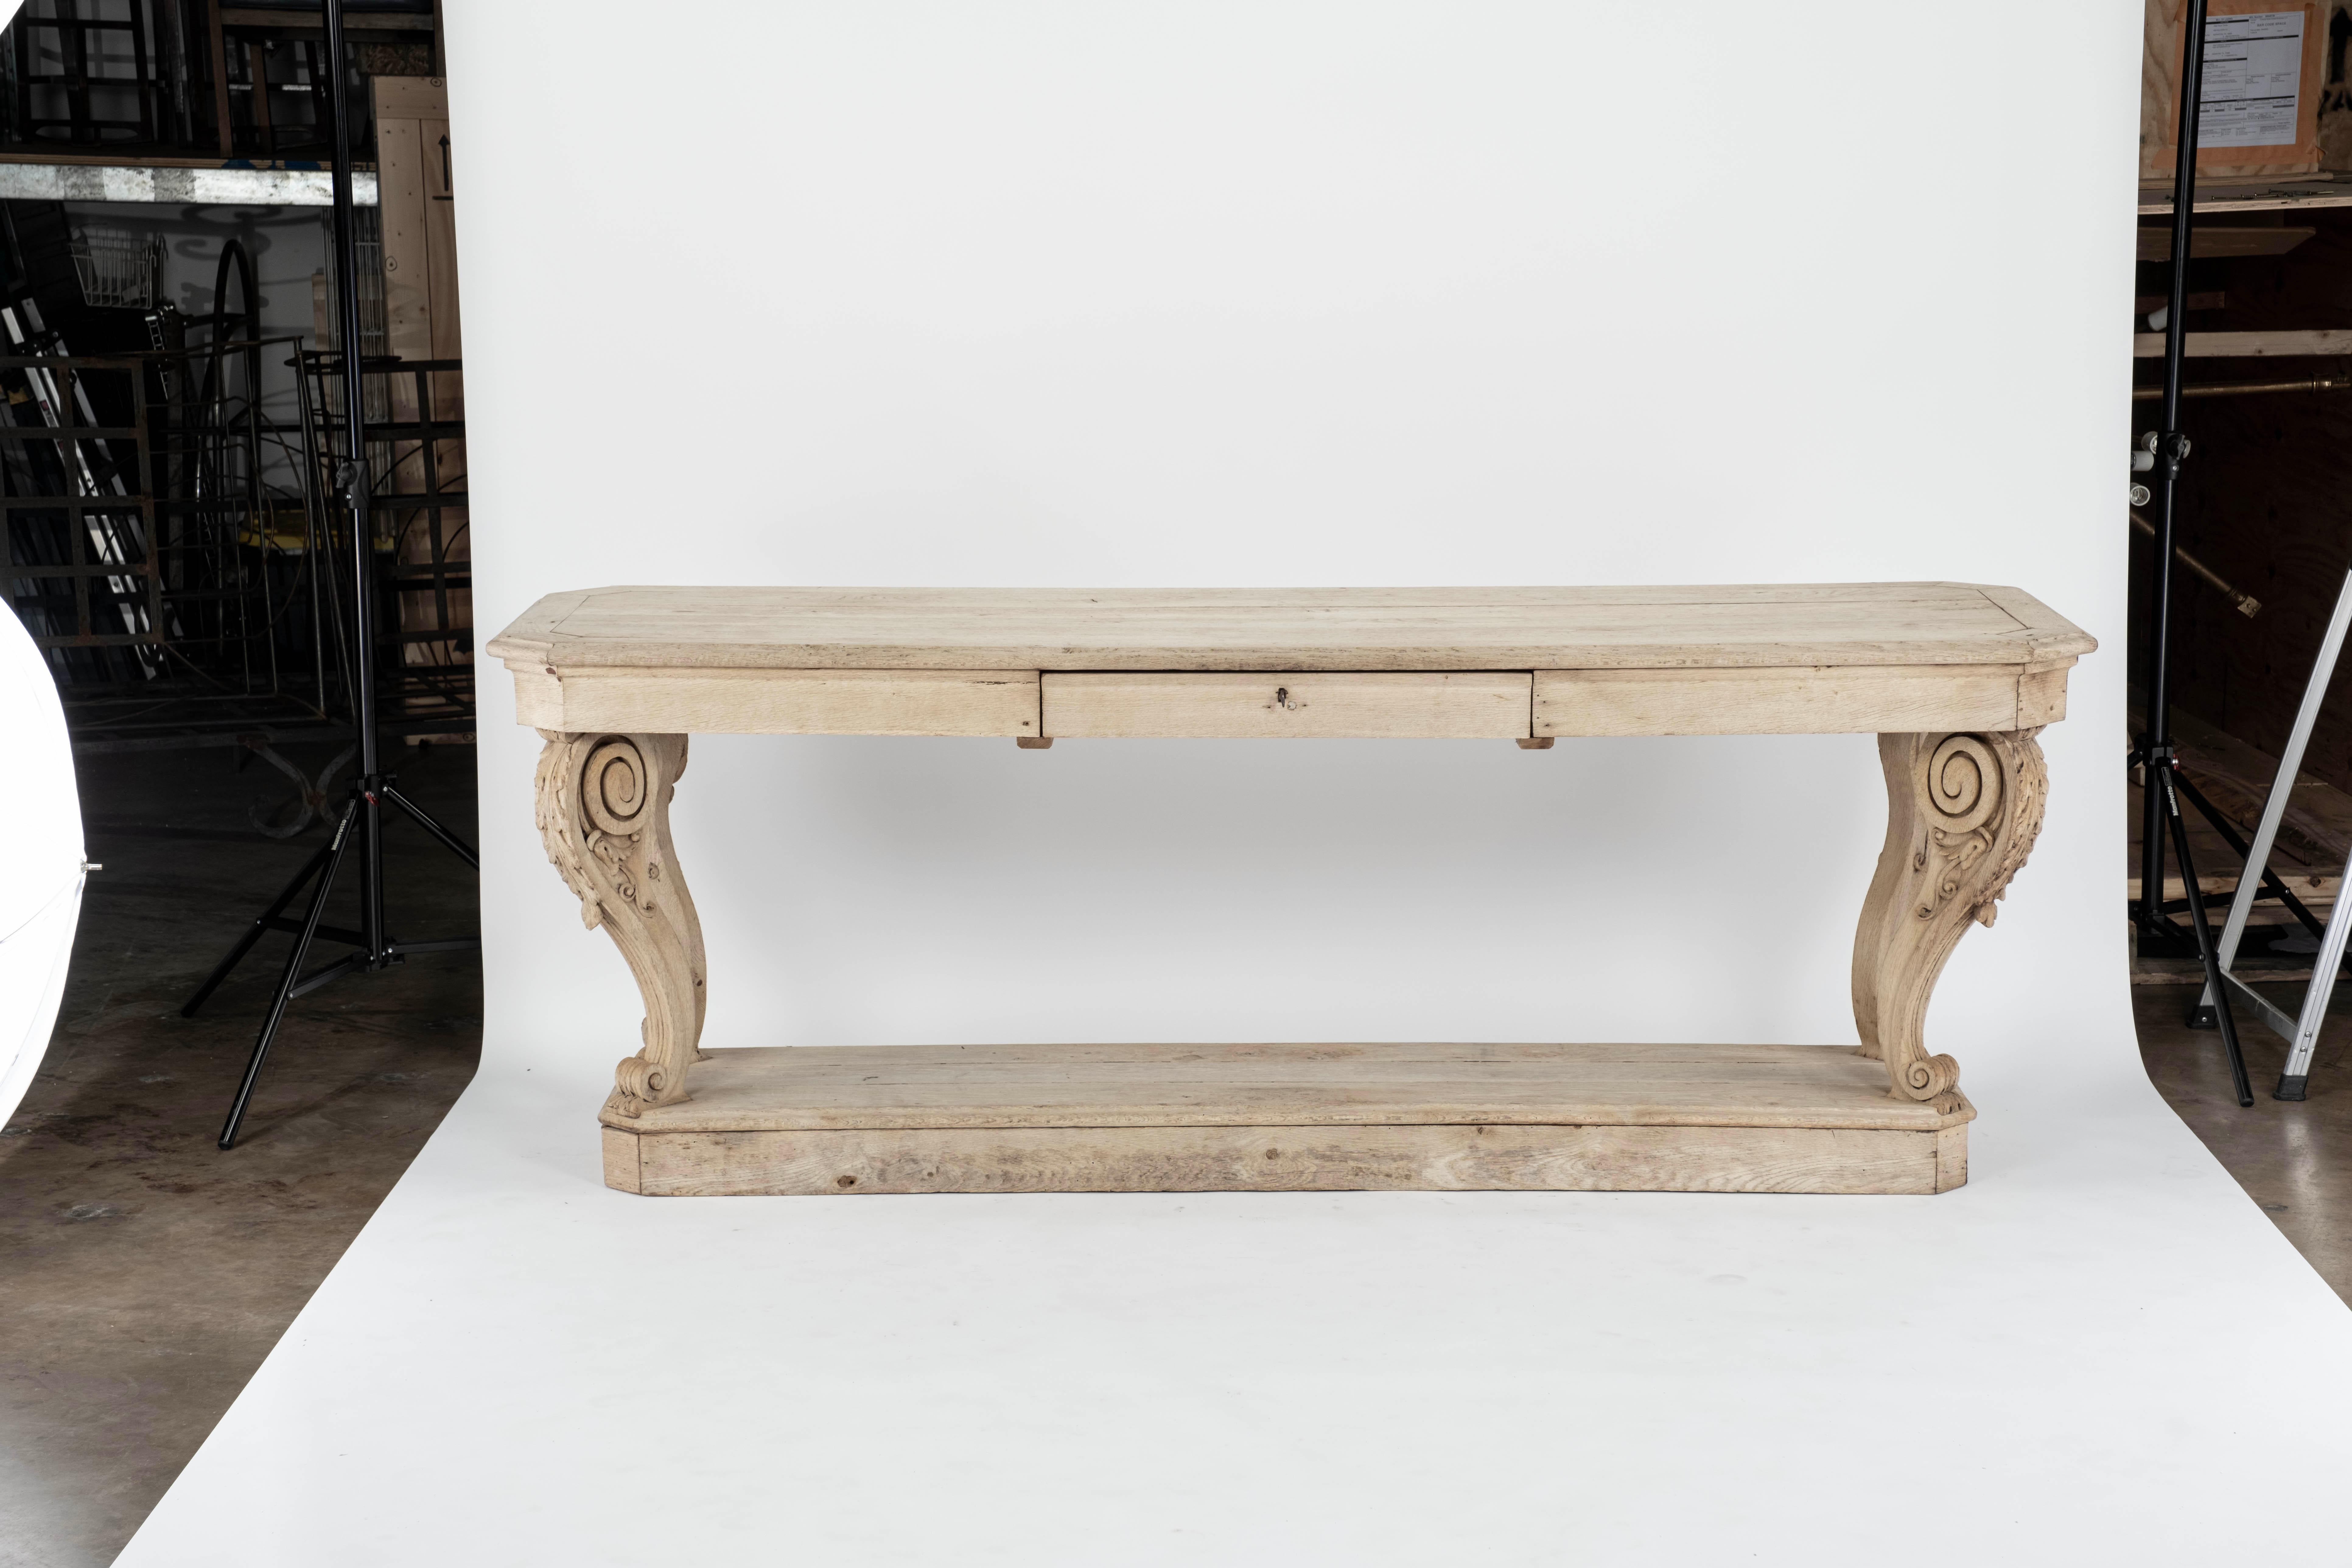 Bleached oak draper's table with a drawer and 4 carved scrolled legs sitting on a raised platform shelf.